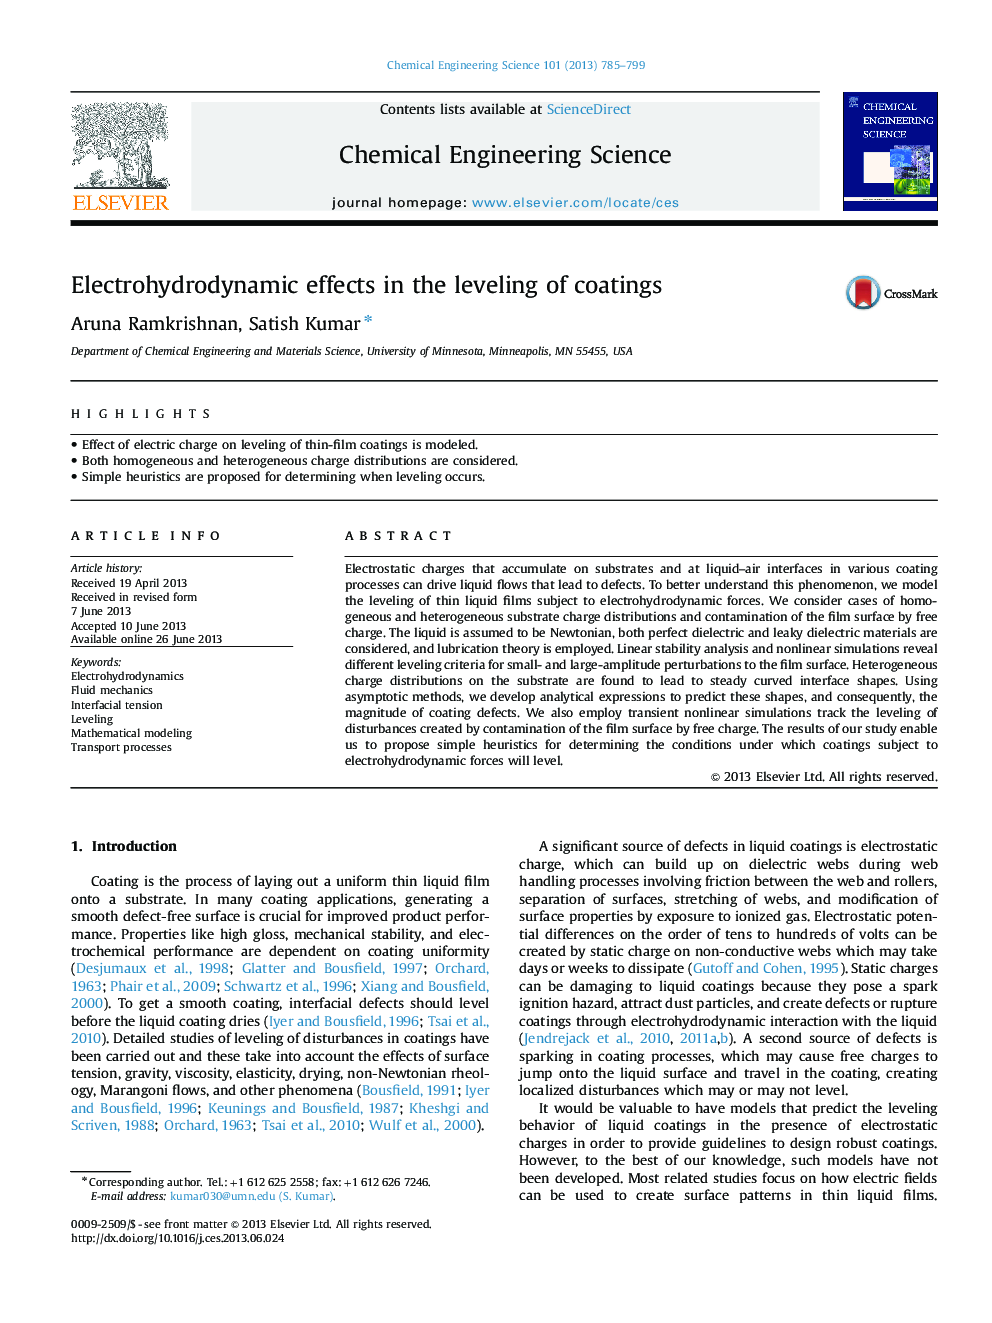 Electrohydrodynamic effects in the leveling of coatings